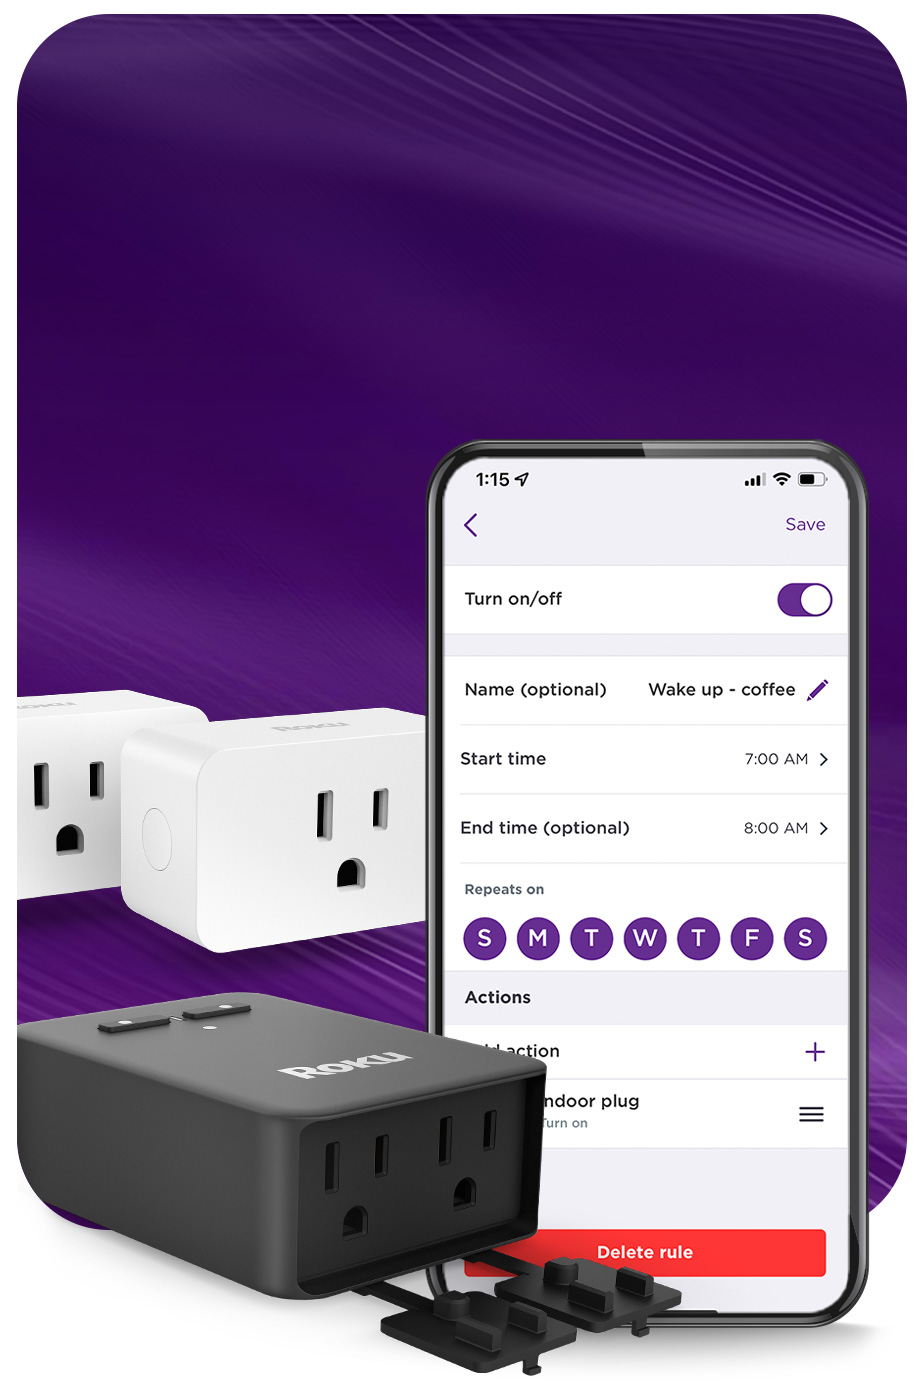 Roku Smart Home Manager App, Manage Your Smart Home Devices